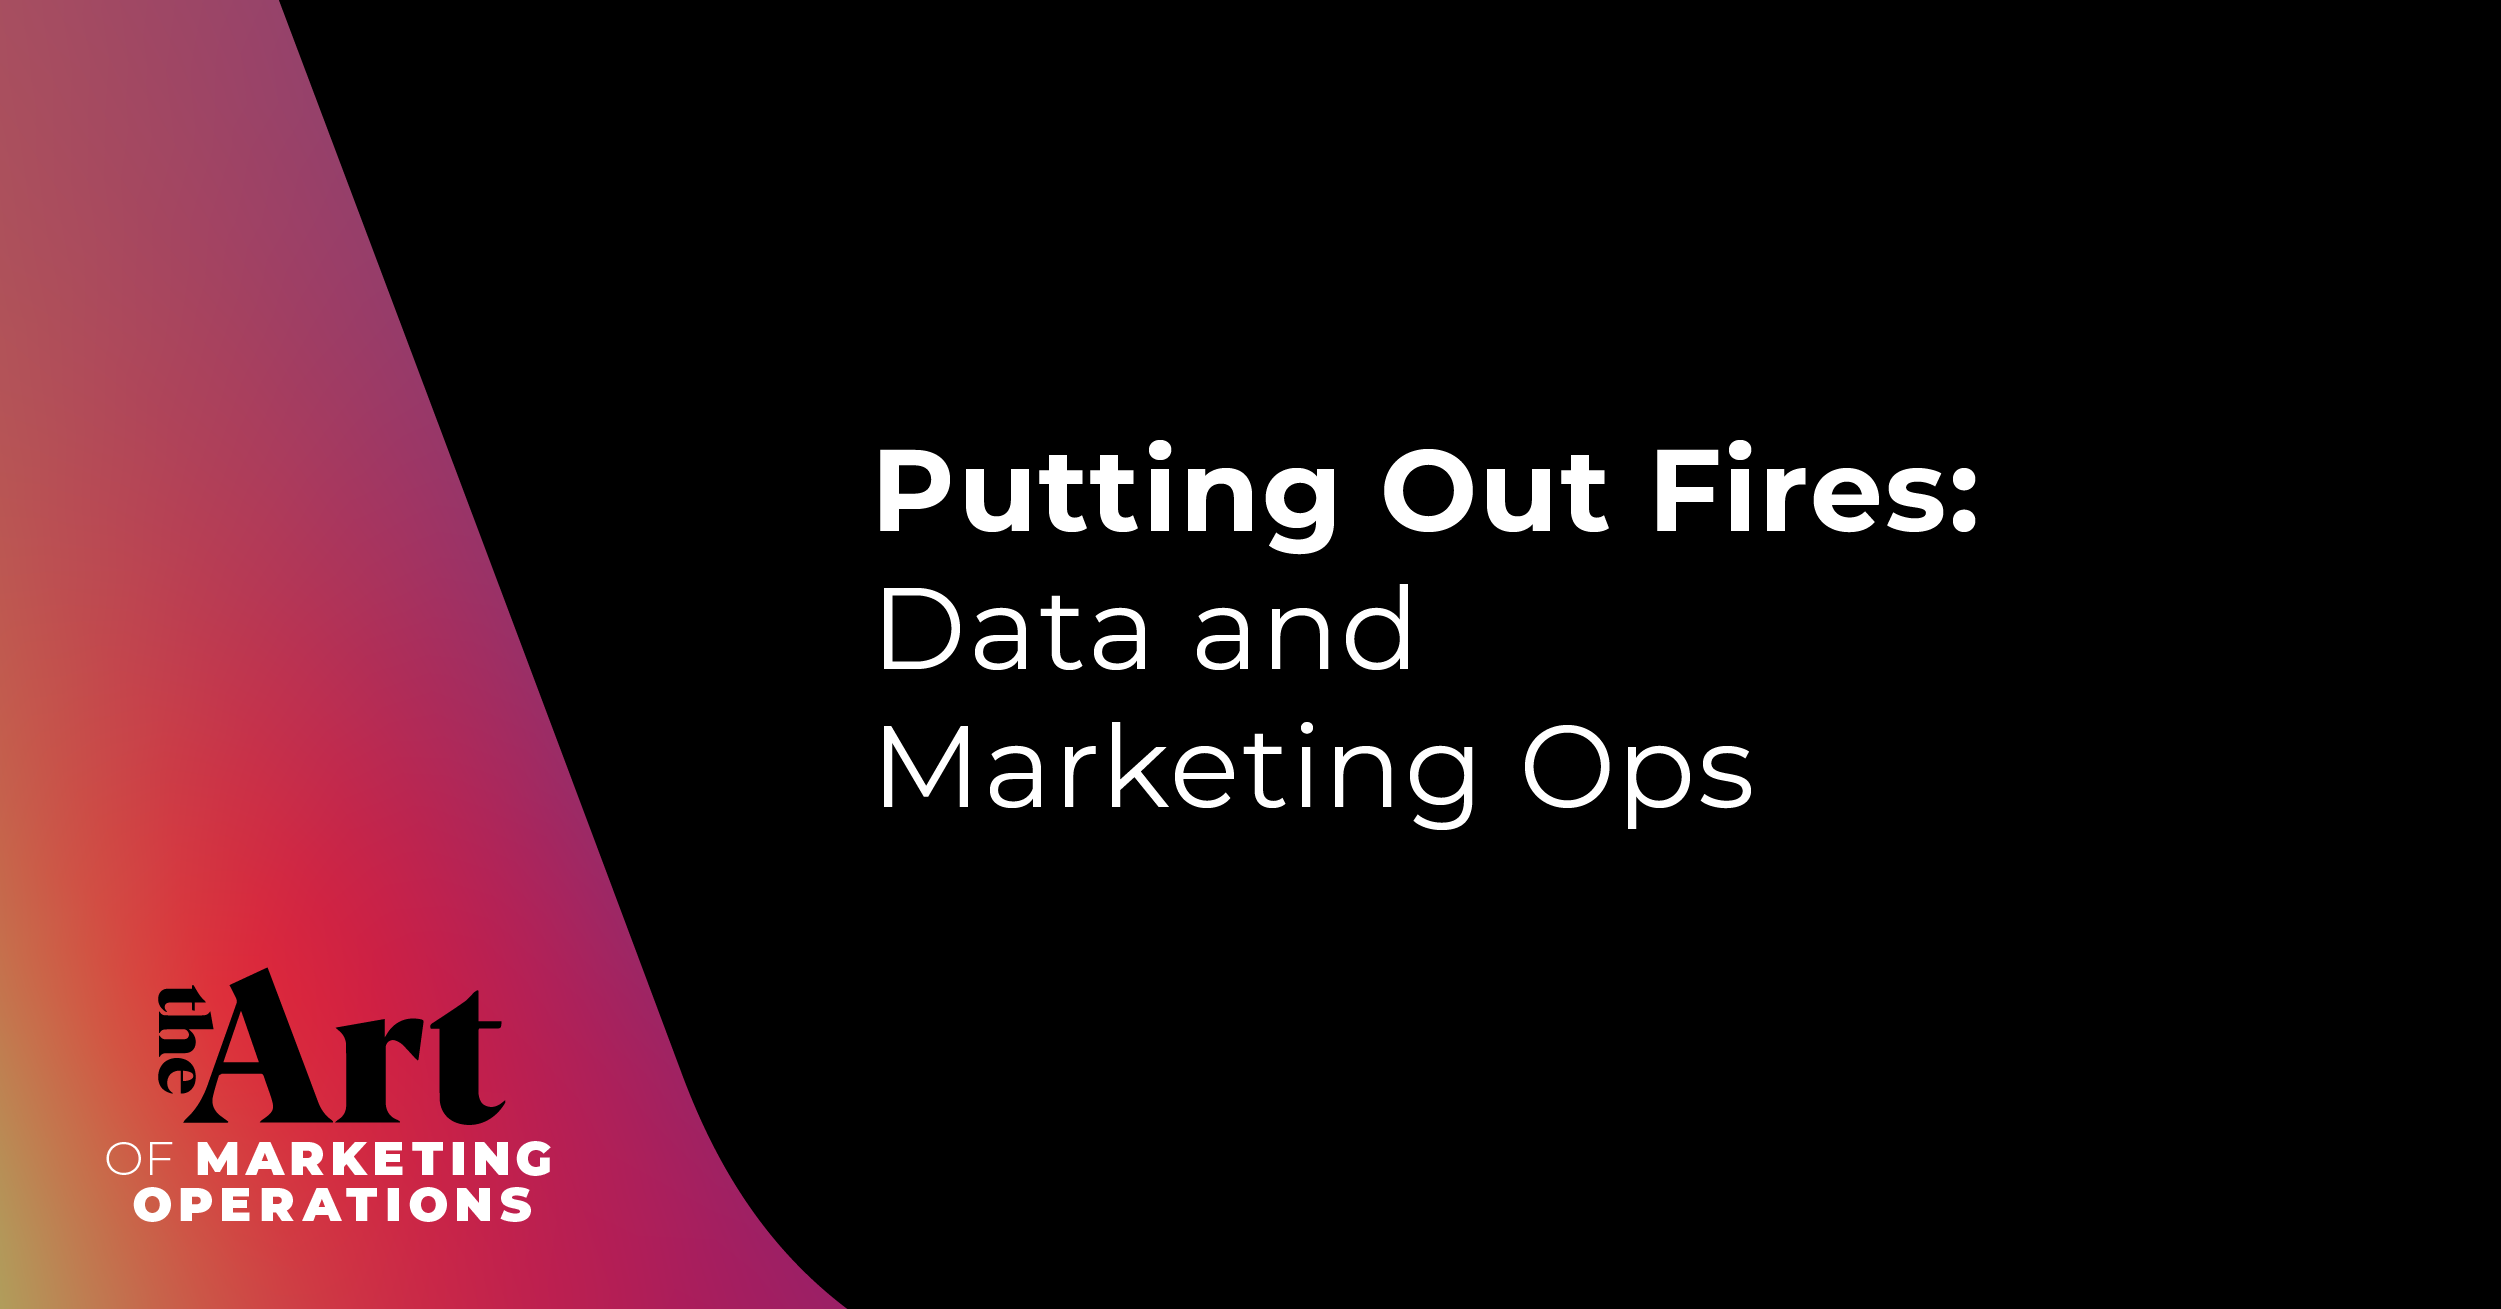 Putting Out Fires: Data and Marketing Ops